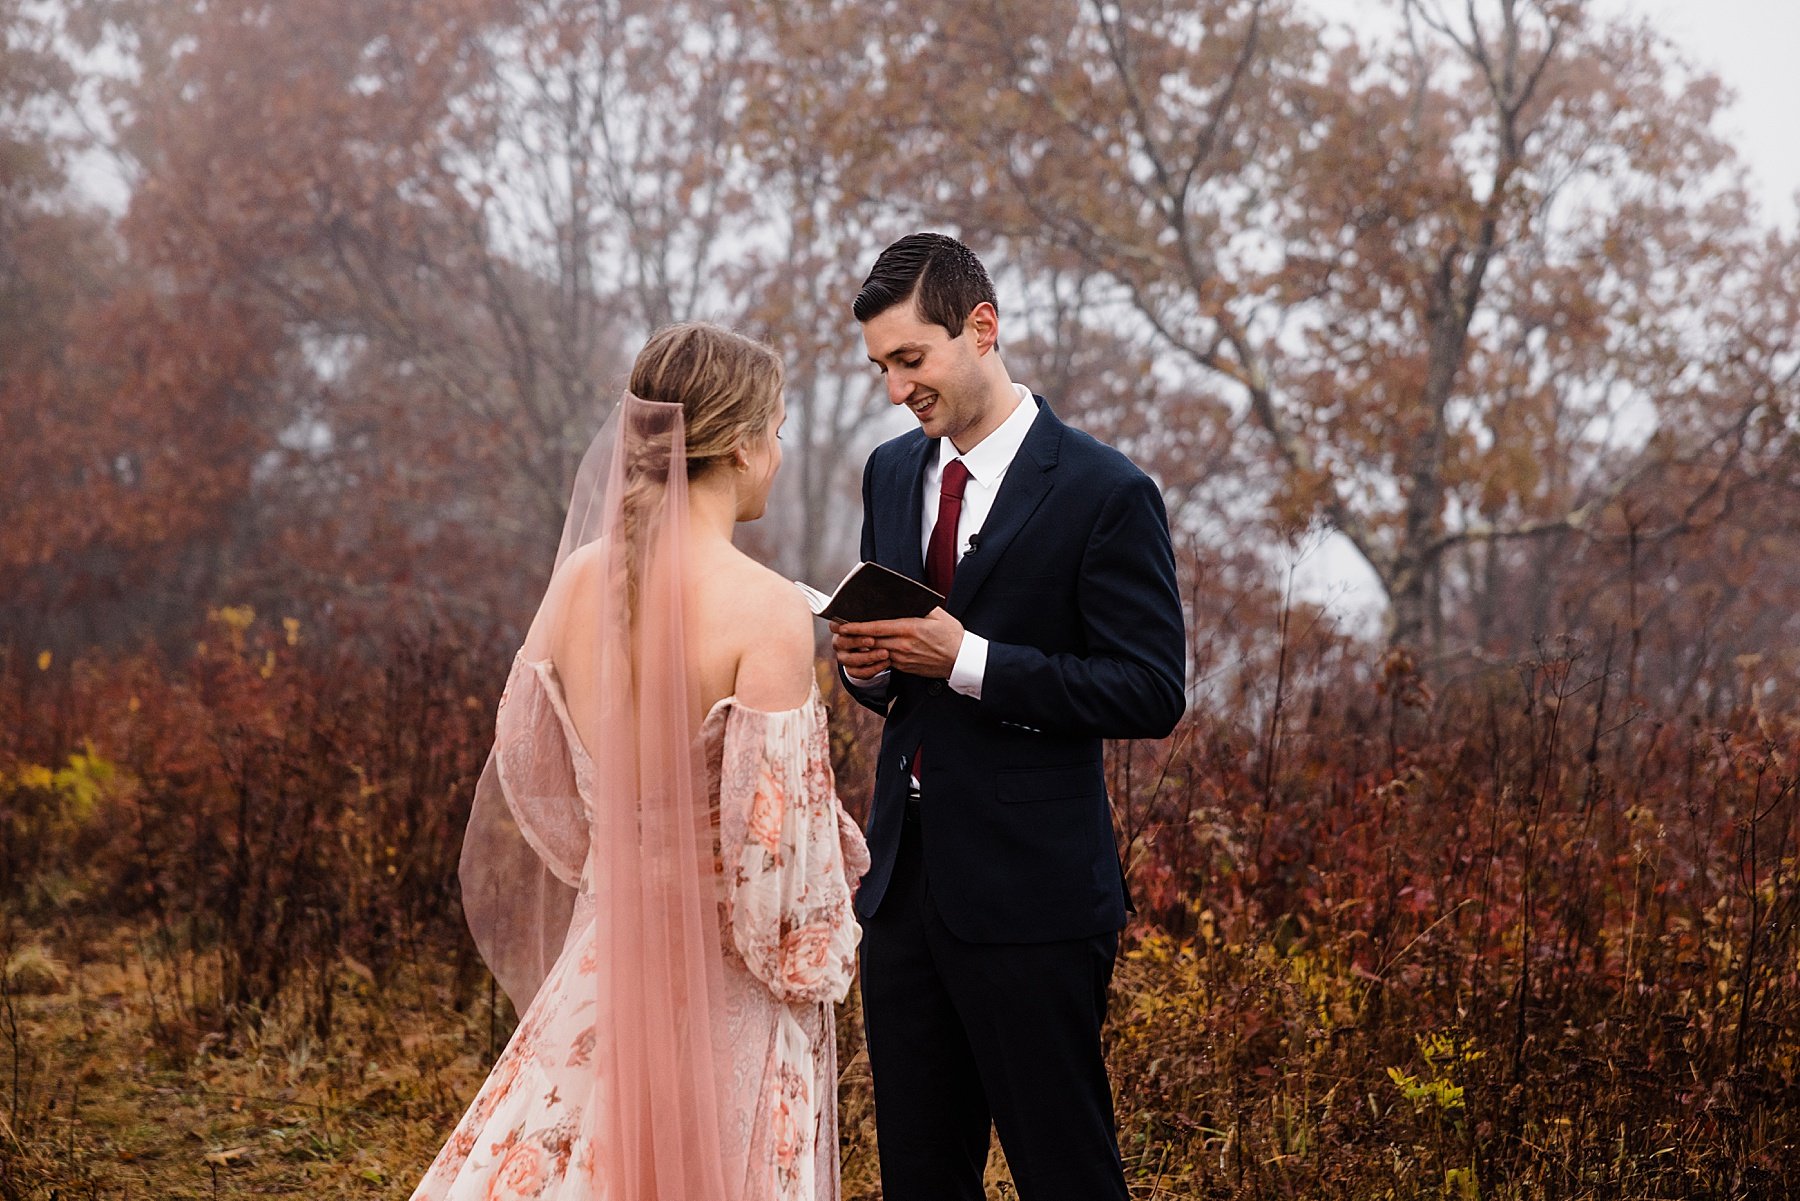 Fall Elopement in the Blue Ridge Mountains of North Carolina